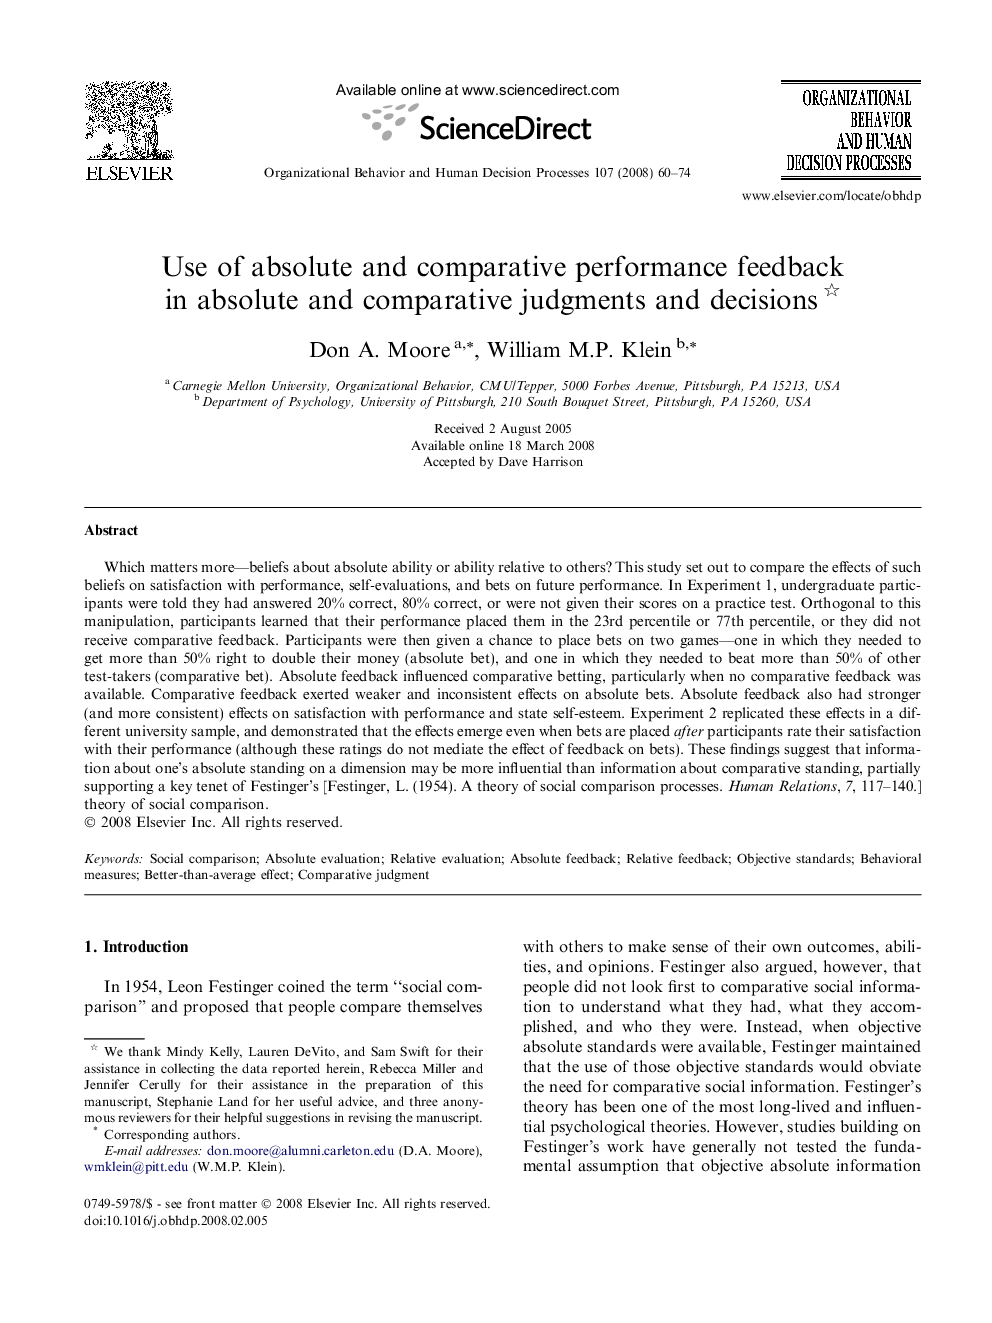 Use of absolute and comparative performance feedback in absolute and comparative judgments and decisions 